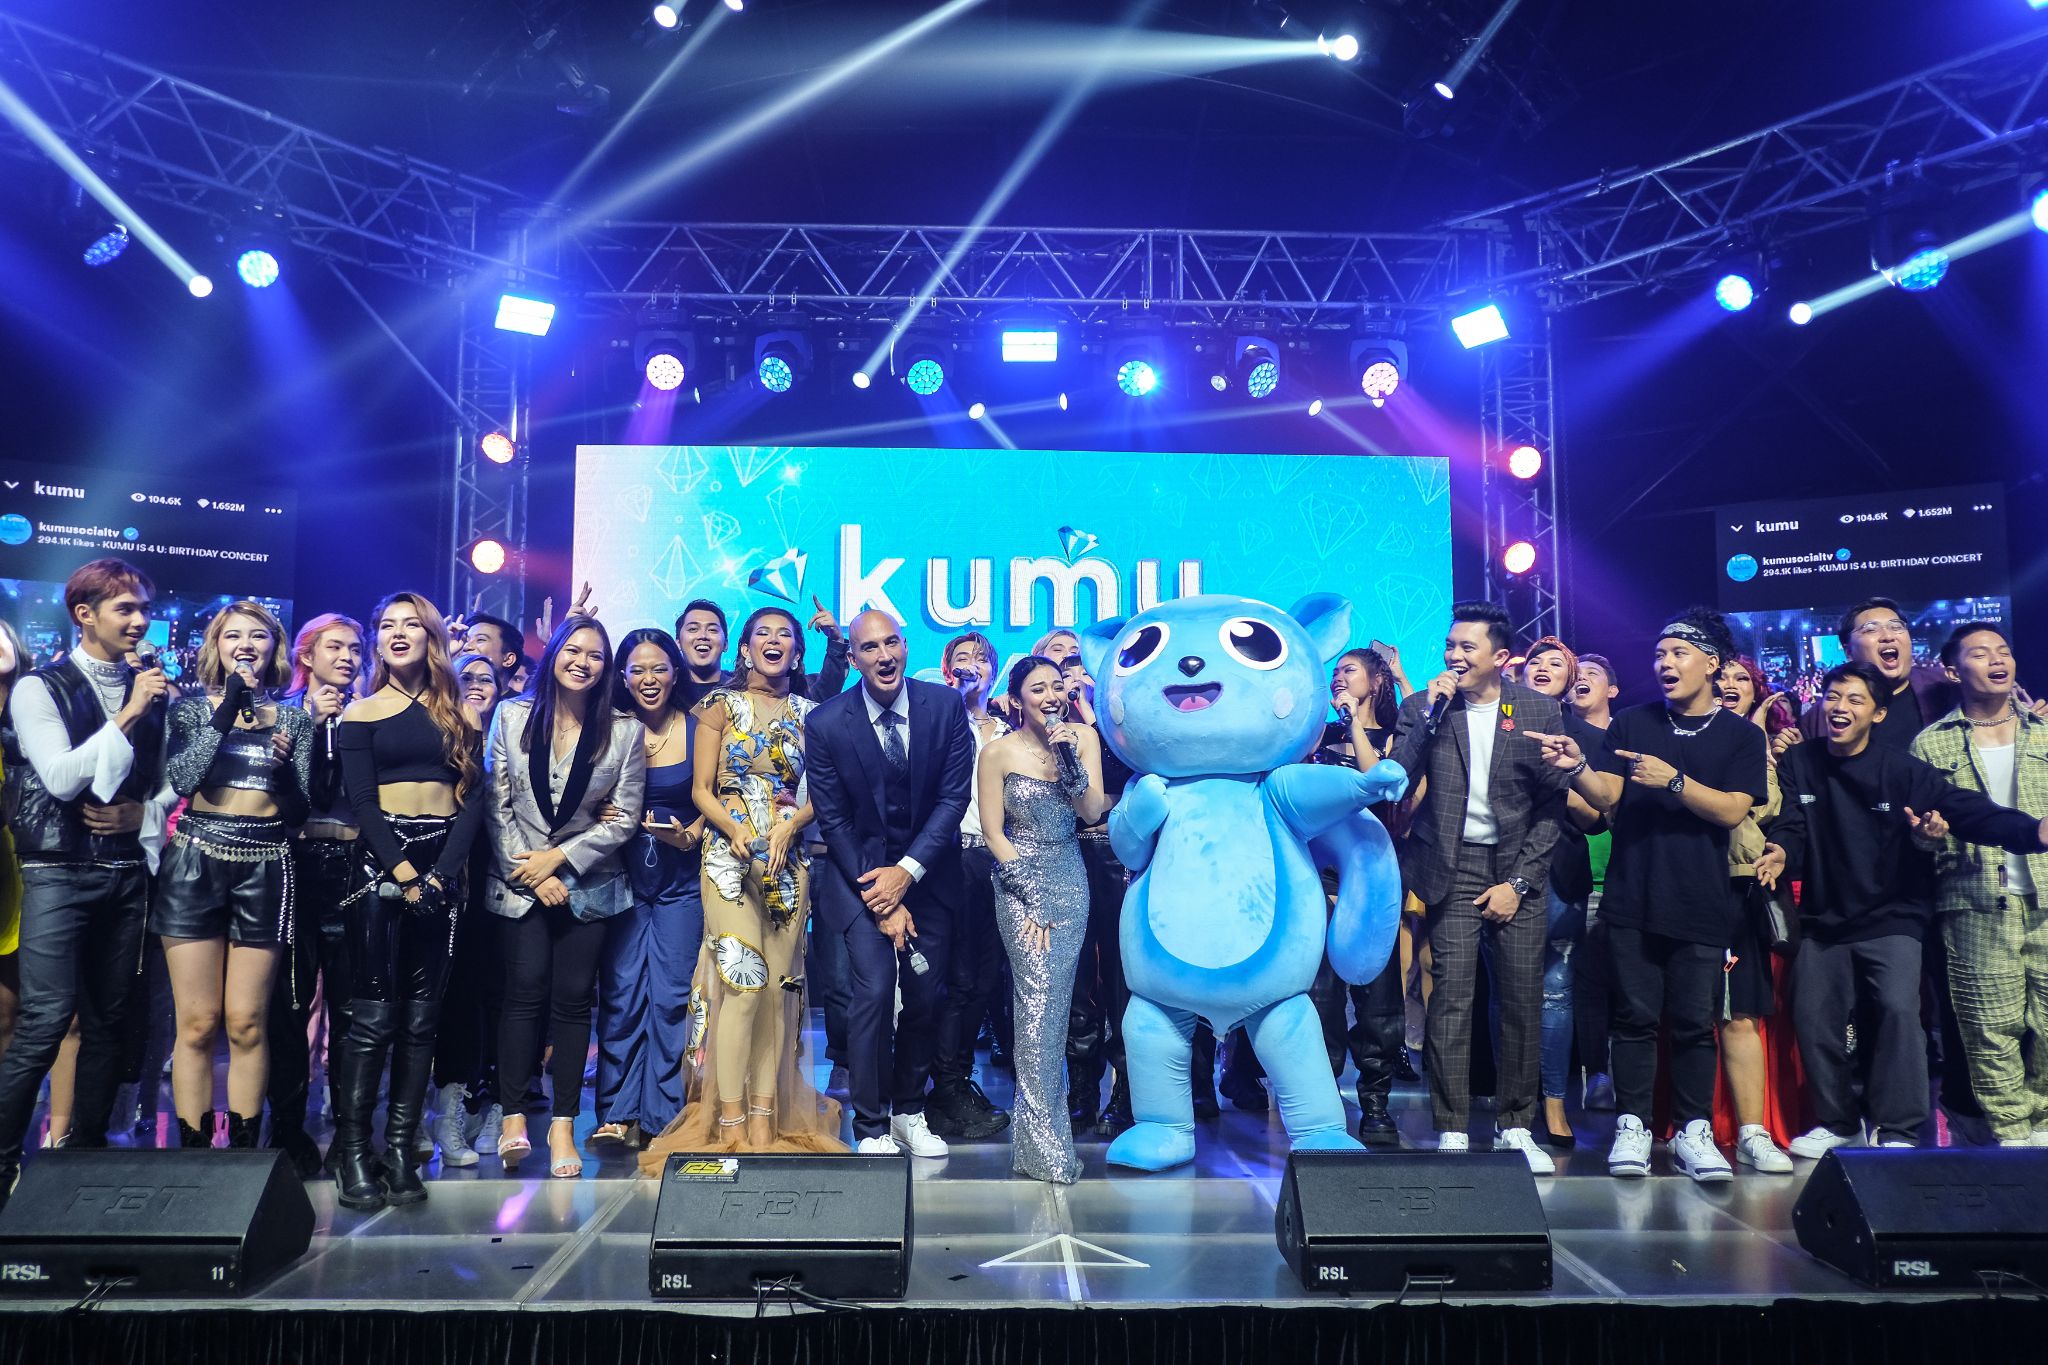 Kumu is 4 U and You and You: The Philippines’ Leading Social App Celebrates Four Years with Stars and Fans Alike